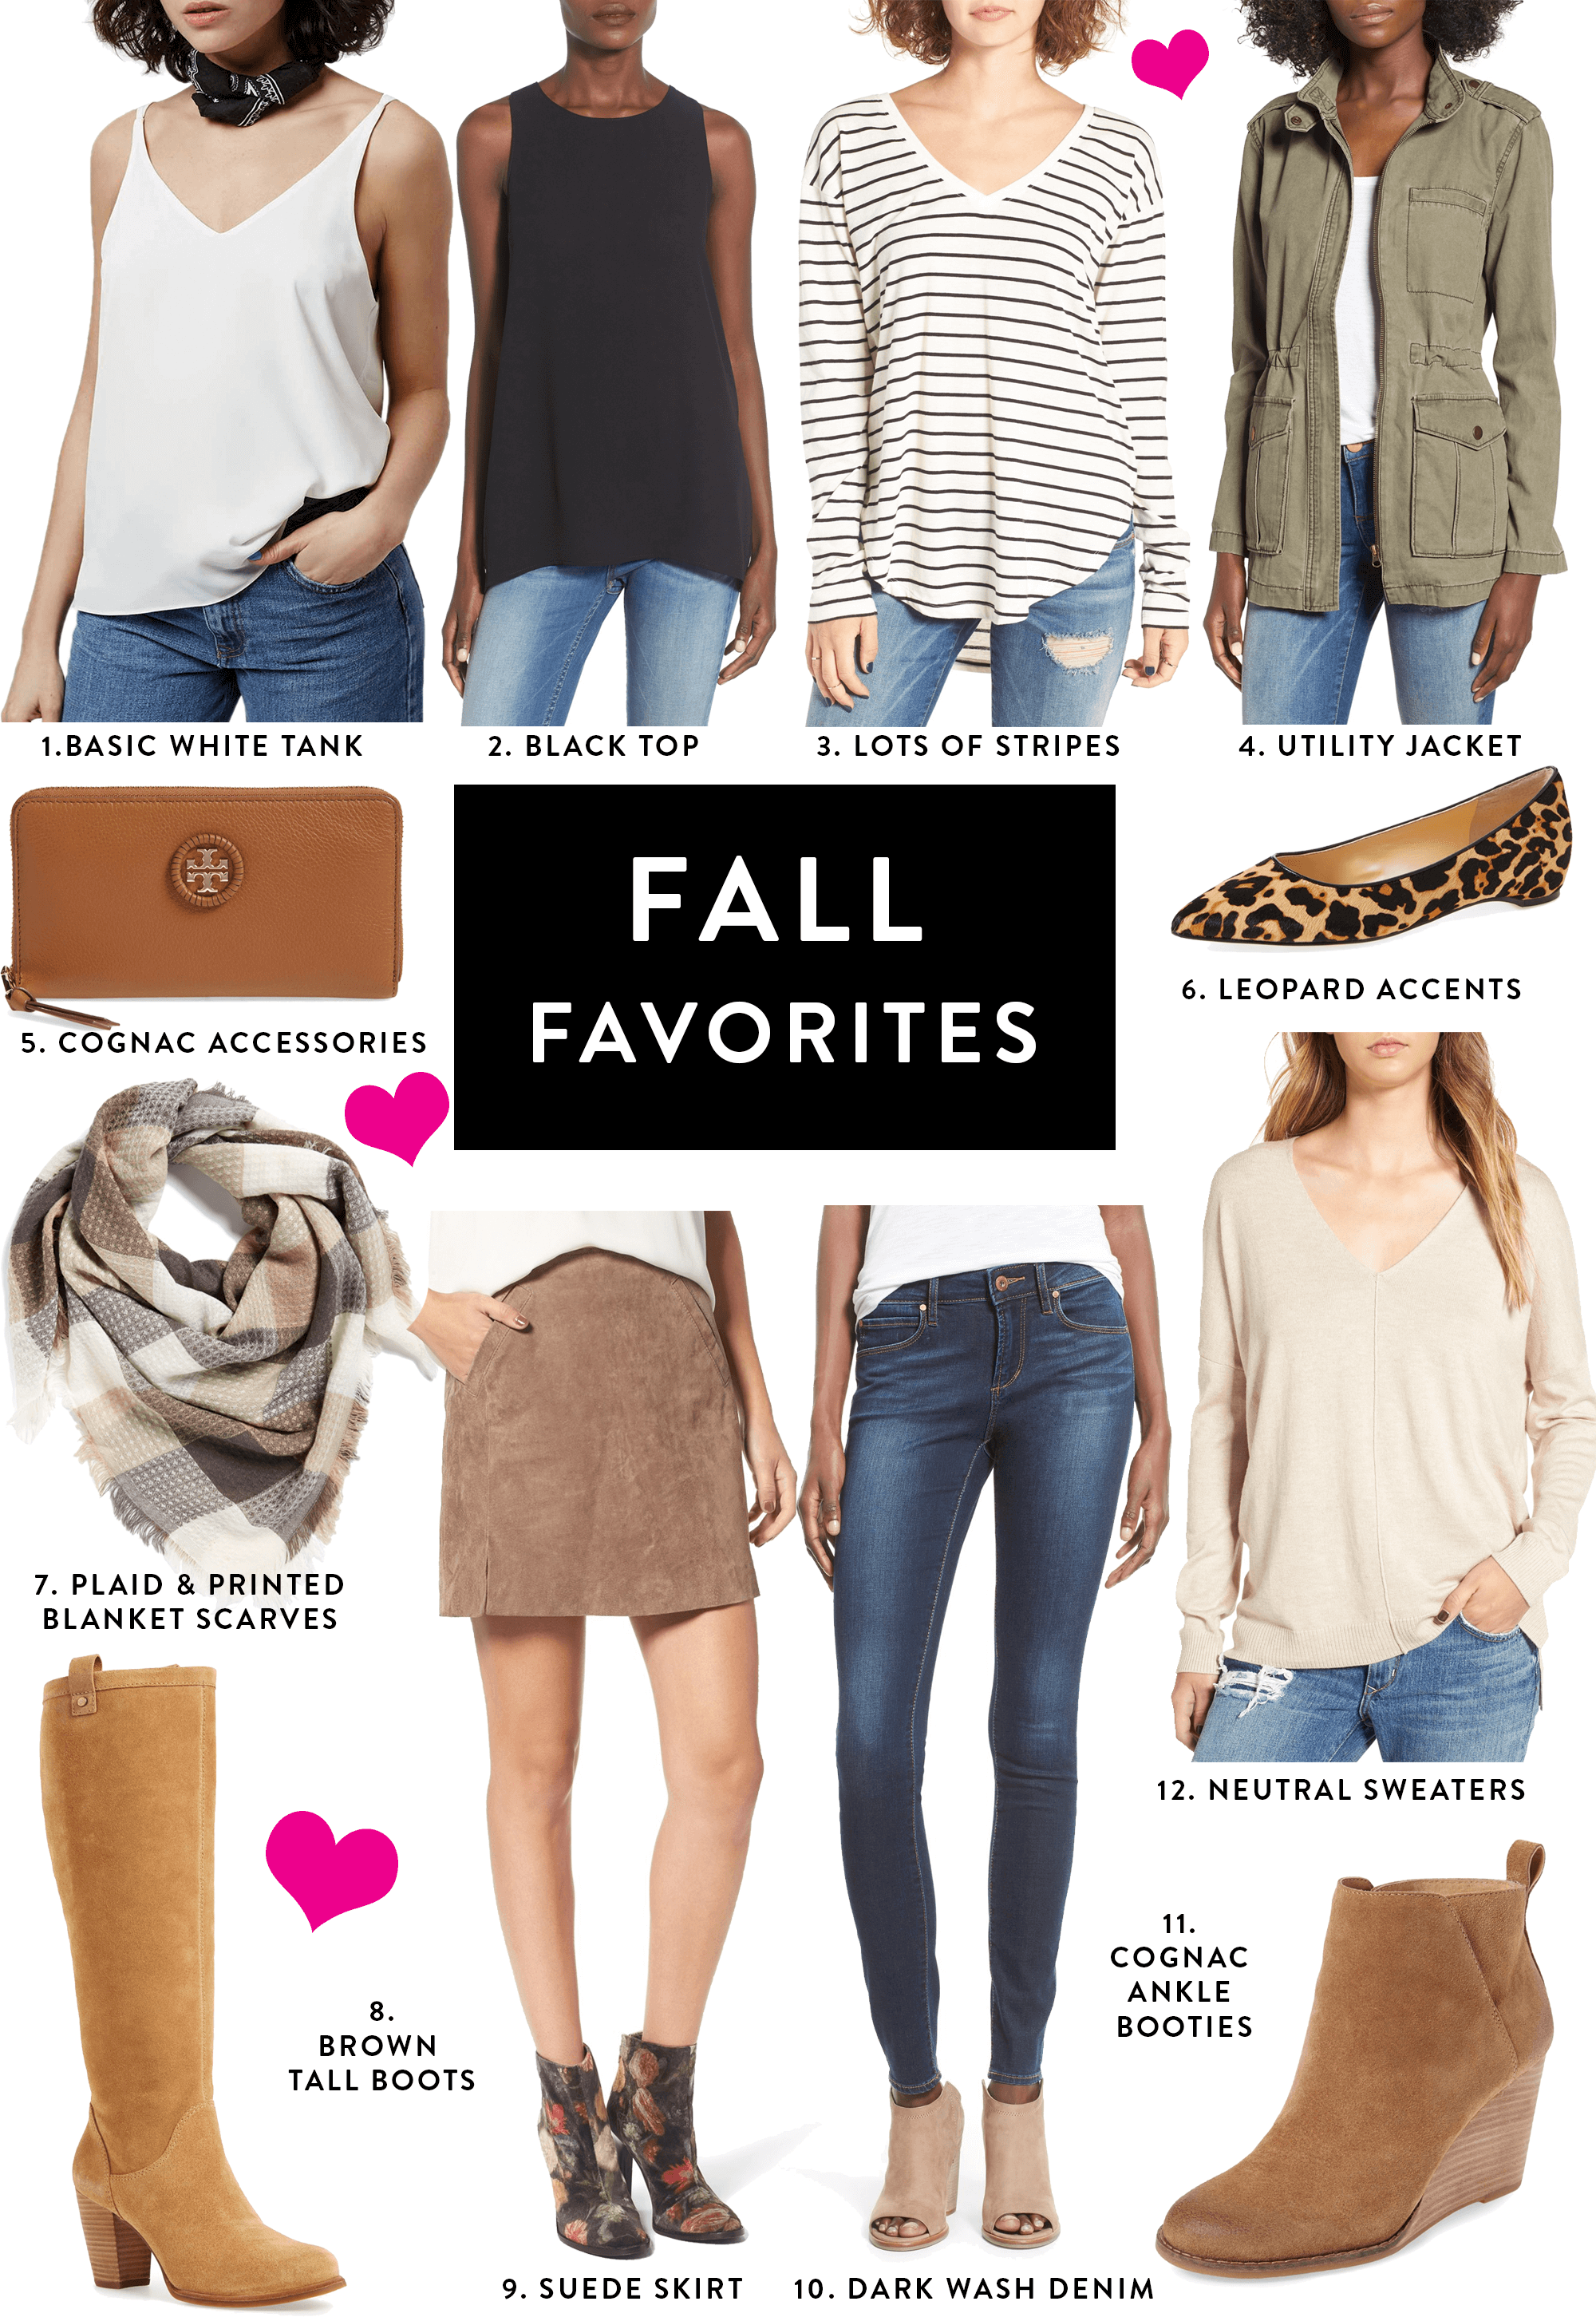 FALL 2017: OUTFIT 4